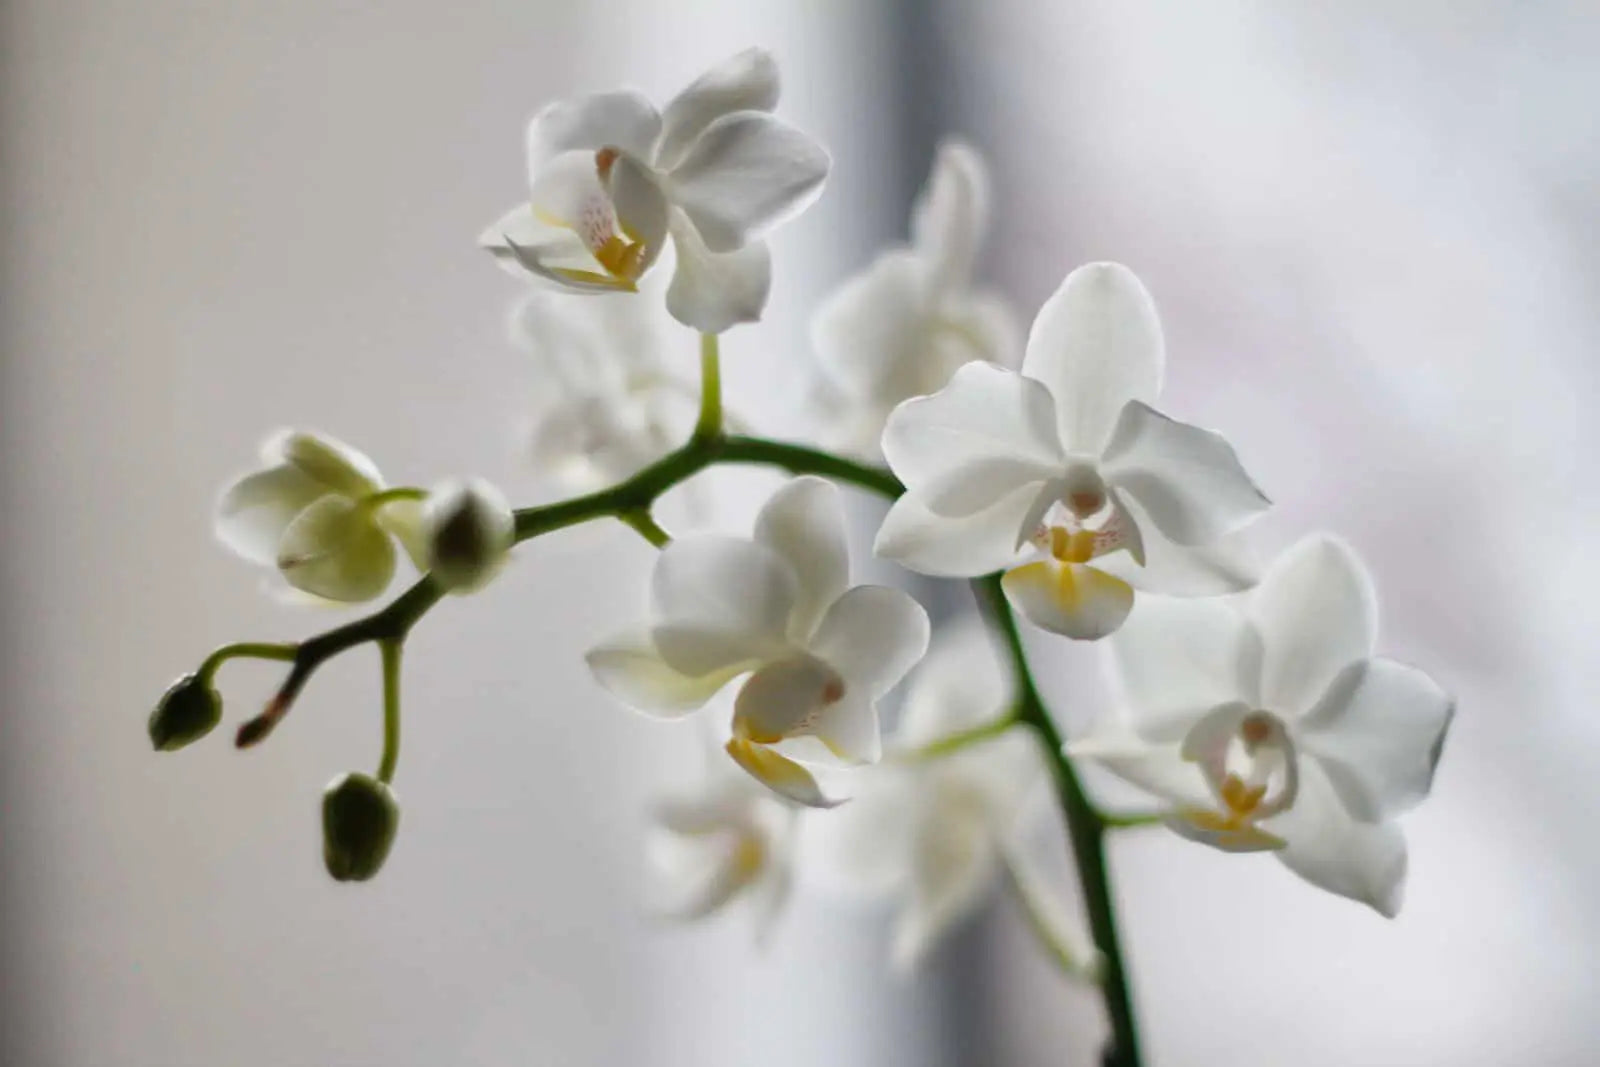 Orchid Care: How To Look After Orchids